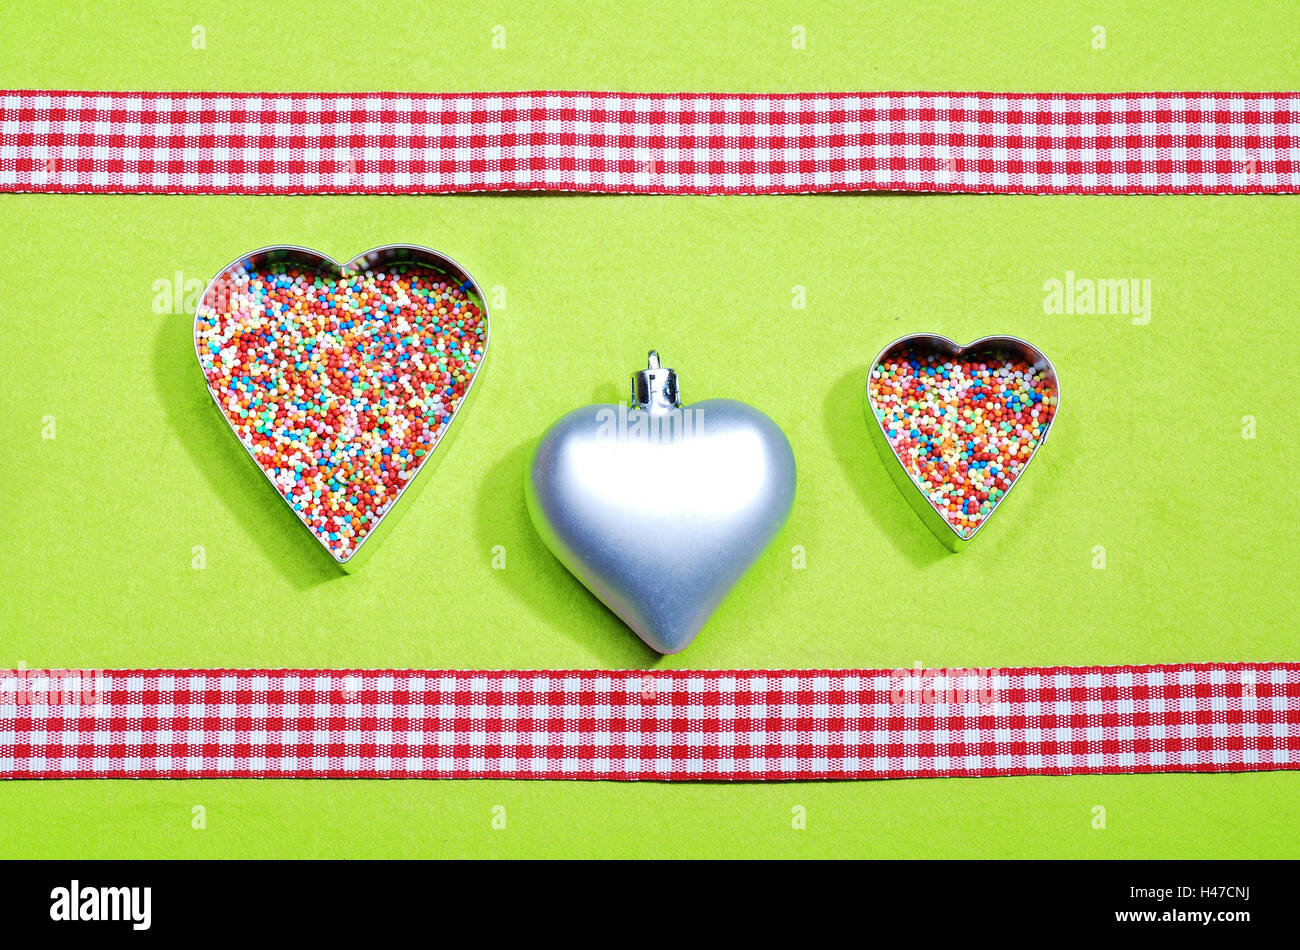 Hearts, pendants, cutters, sugar pearls, square ribbons, Stock Photo